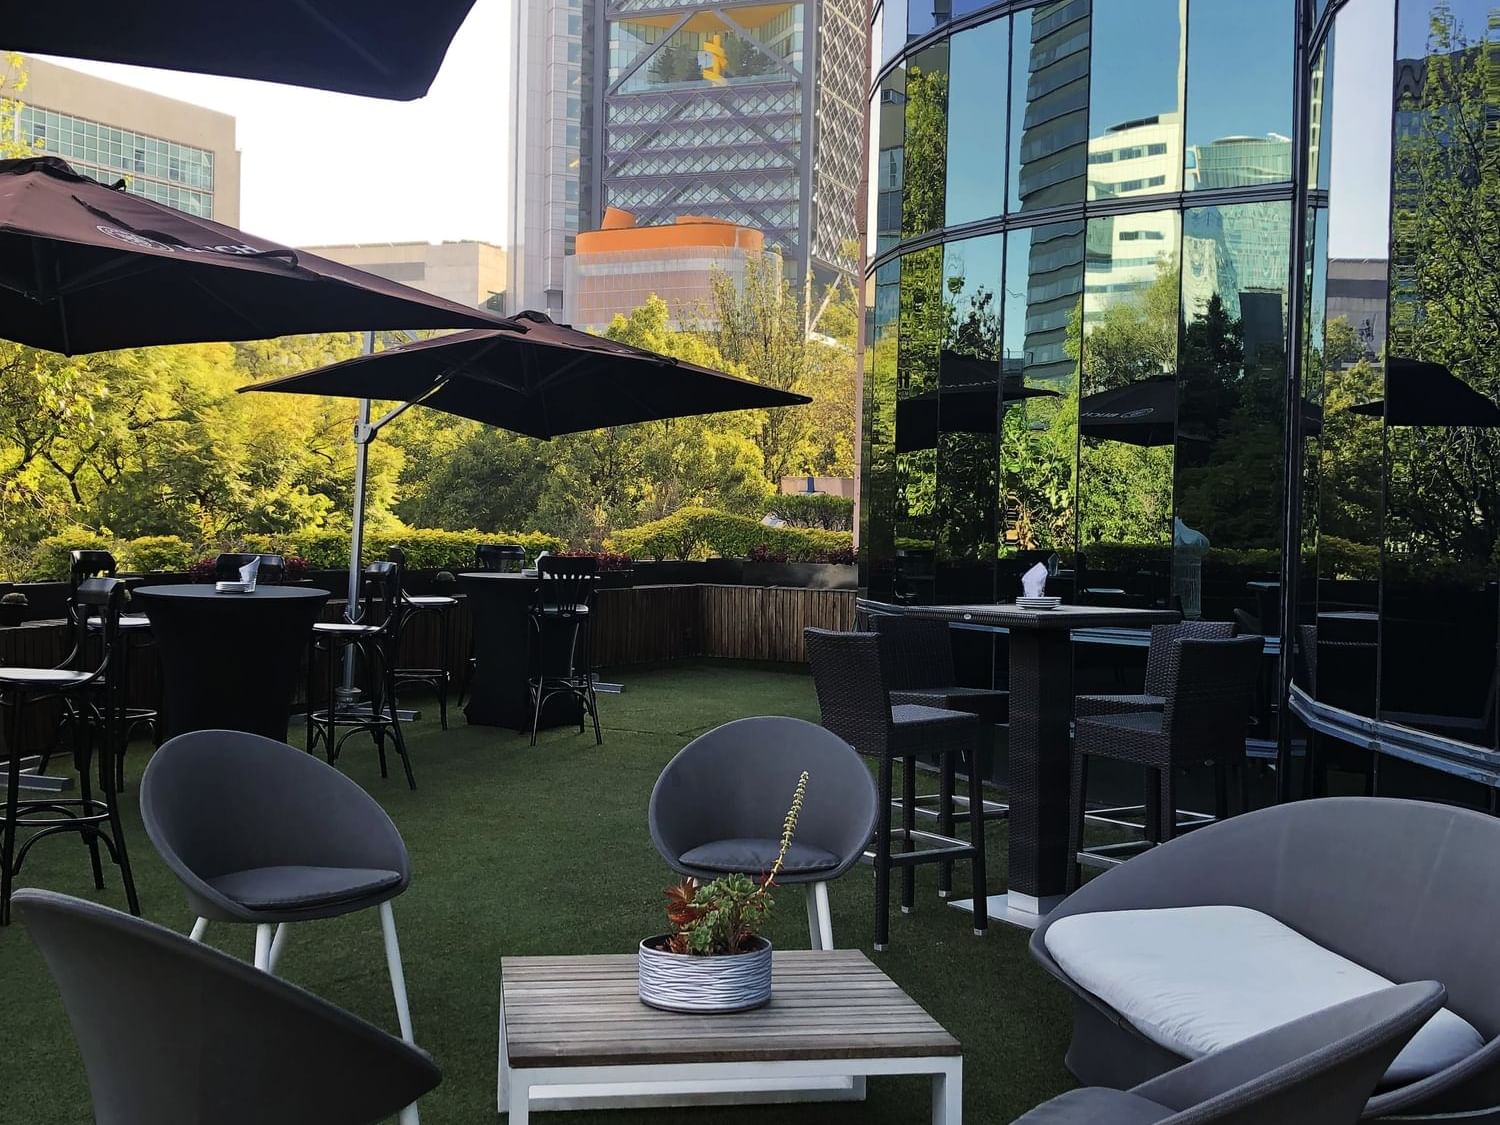 
An Outdoor lounge area at Marquis Reforma